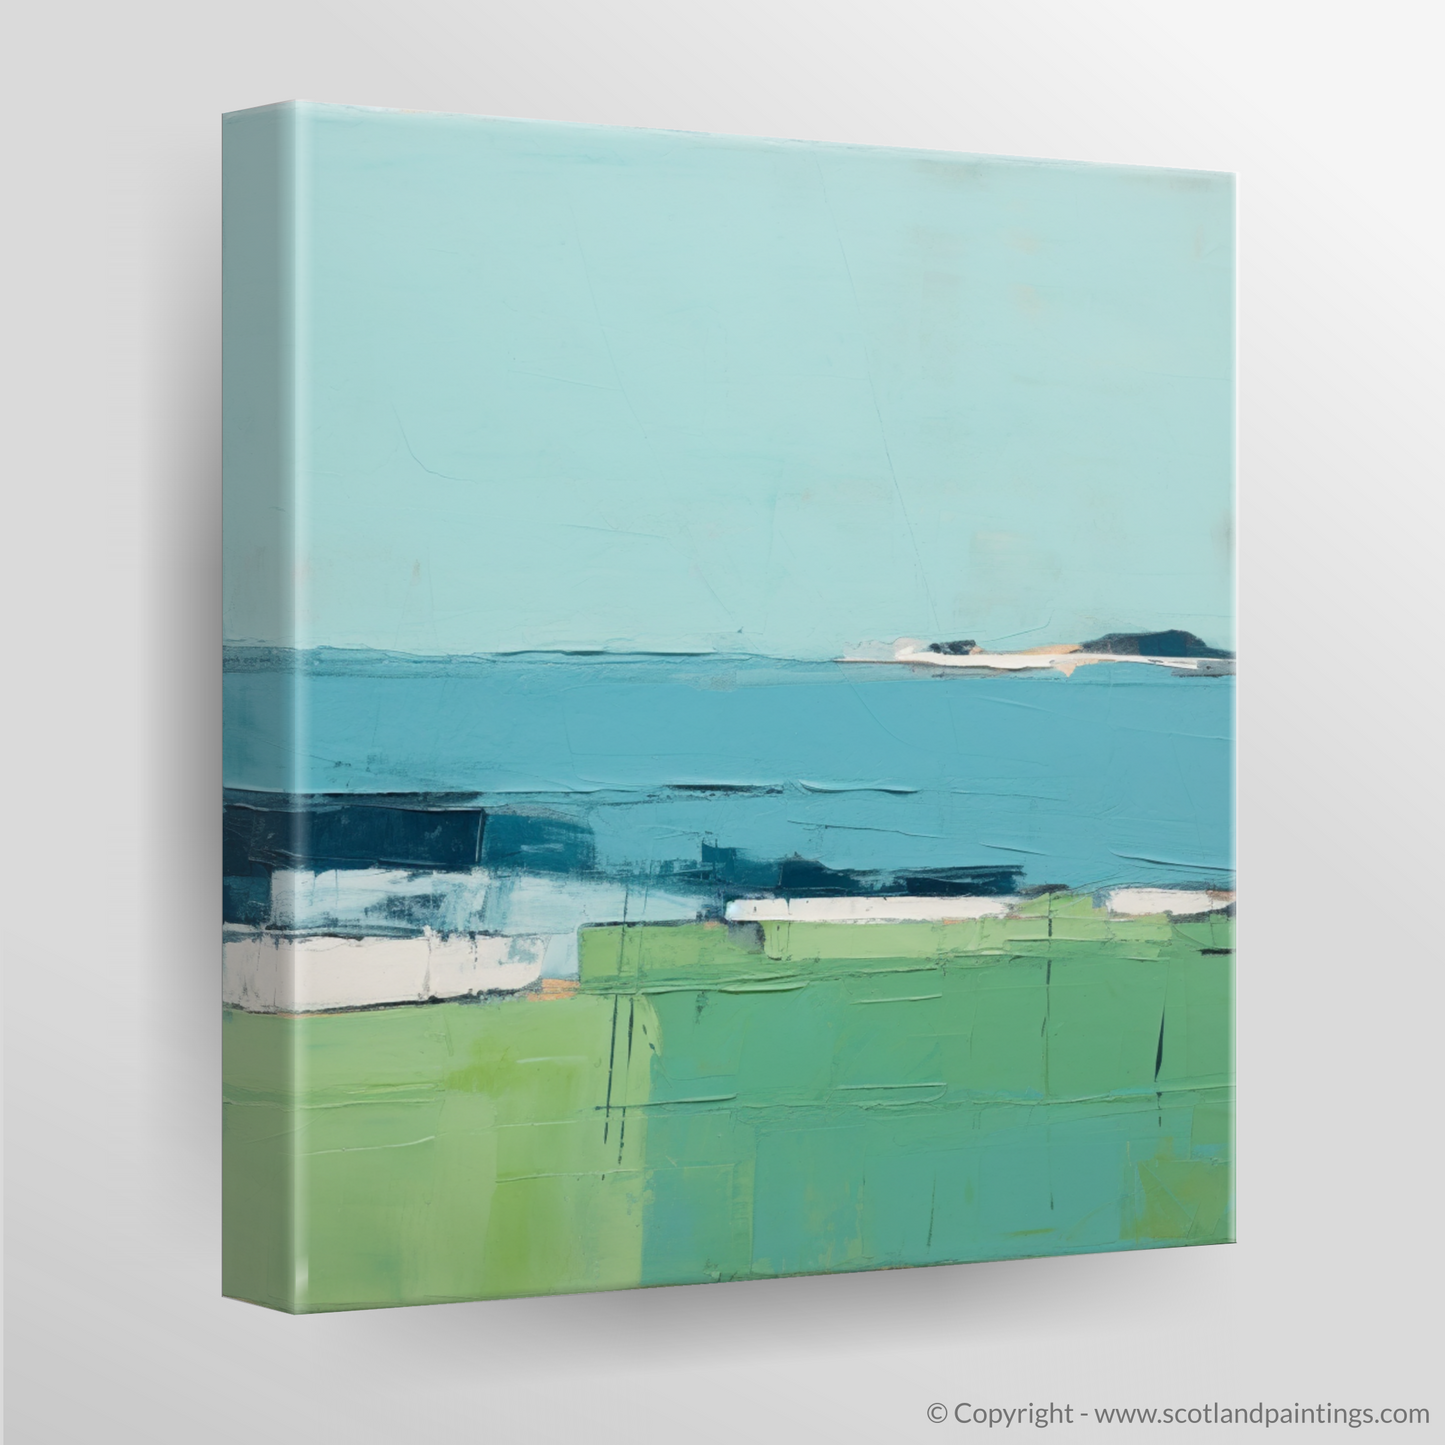 Isle of Iona: A Study in Serenity and Minimalism